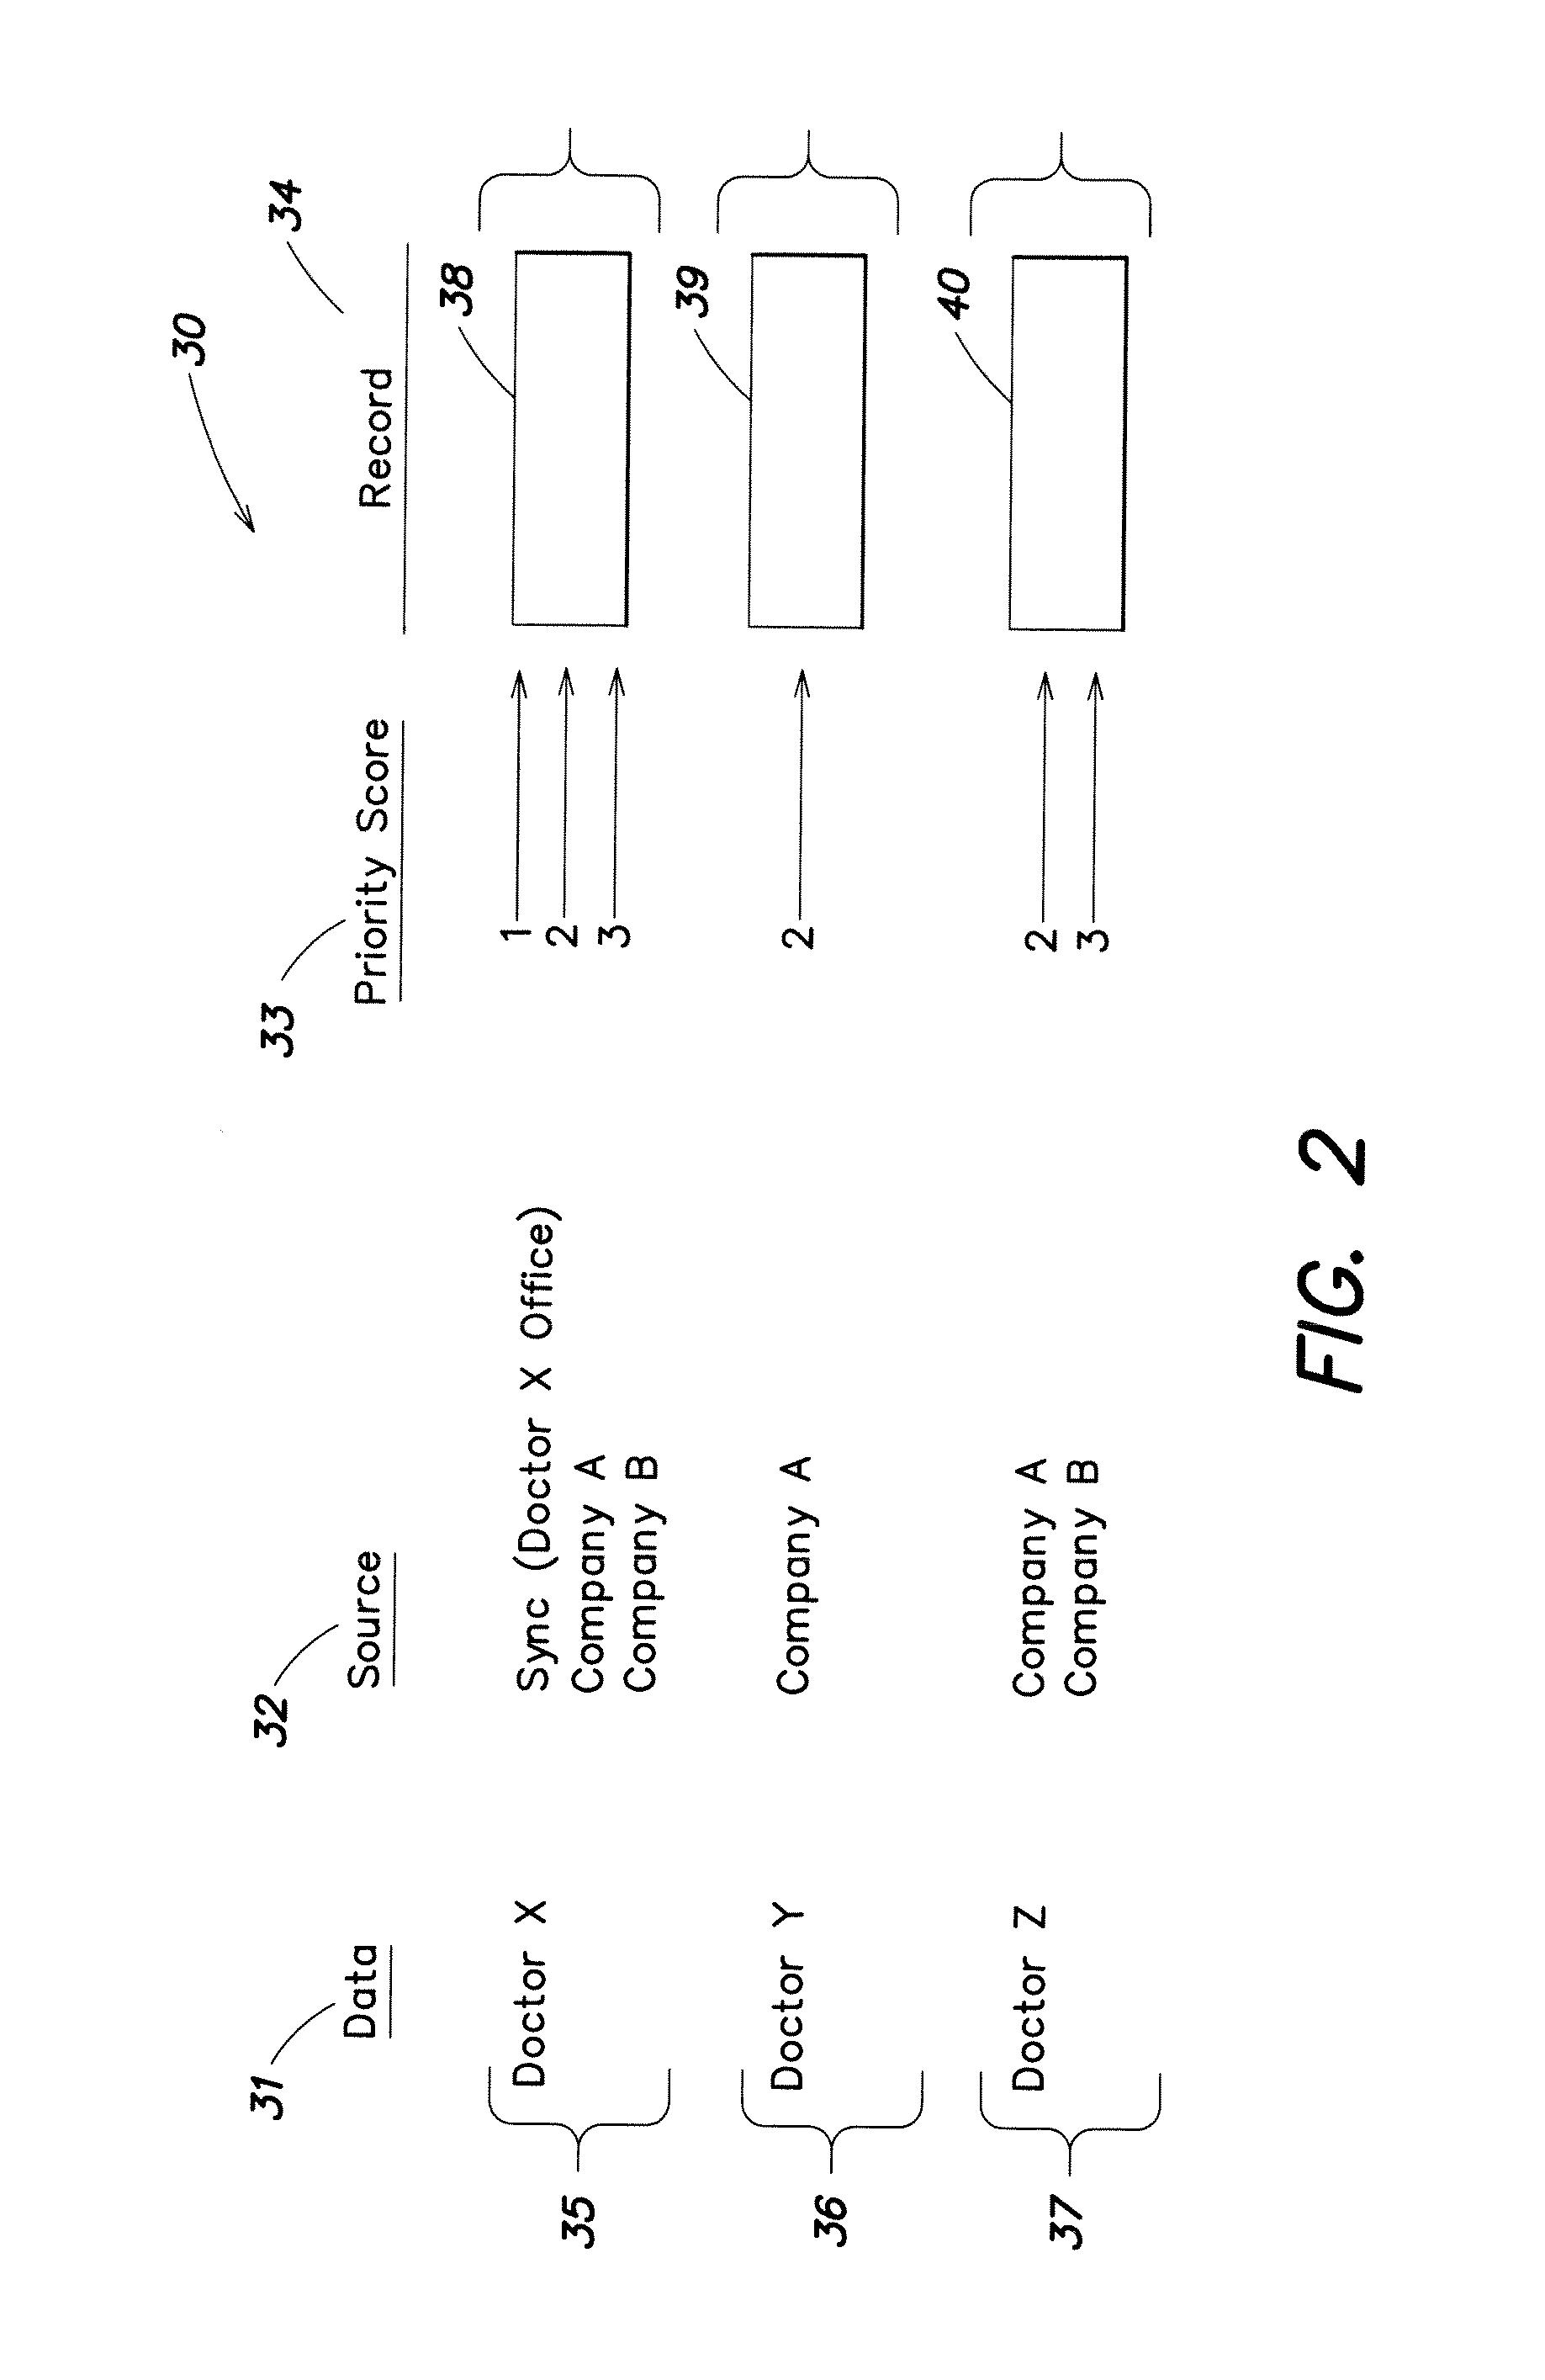 System and method for accessing healthcare appointments from multiple disparate sources